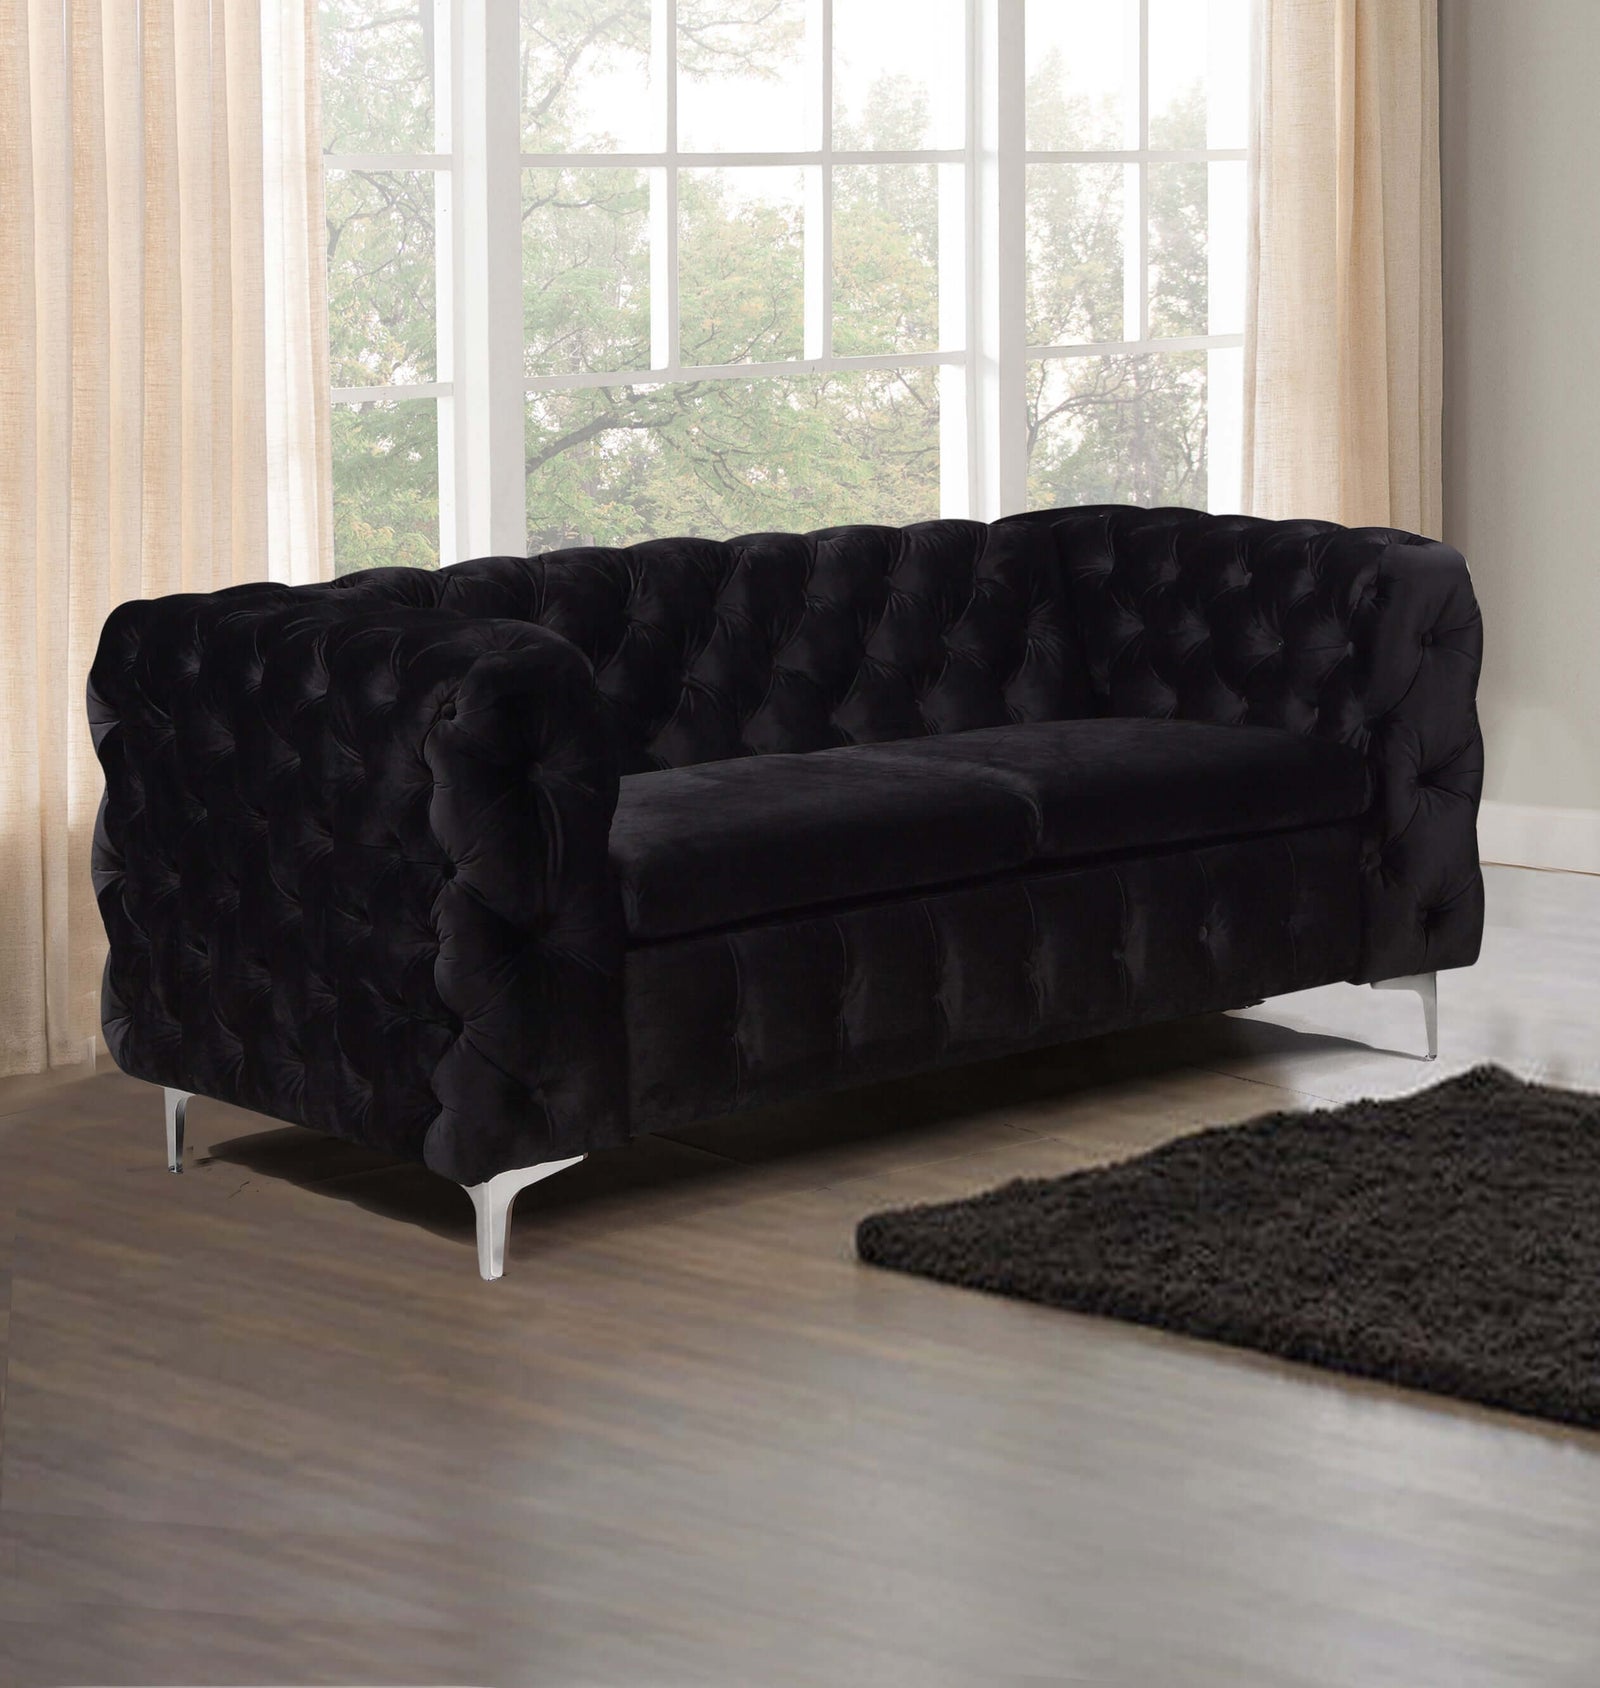 2 Seater Sofa Classic Button Tufted Lounge in Black Velvet Fabric with Metal Legs-Upinteriors